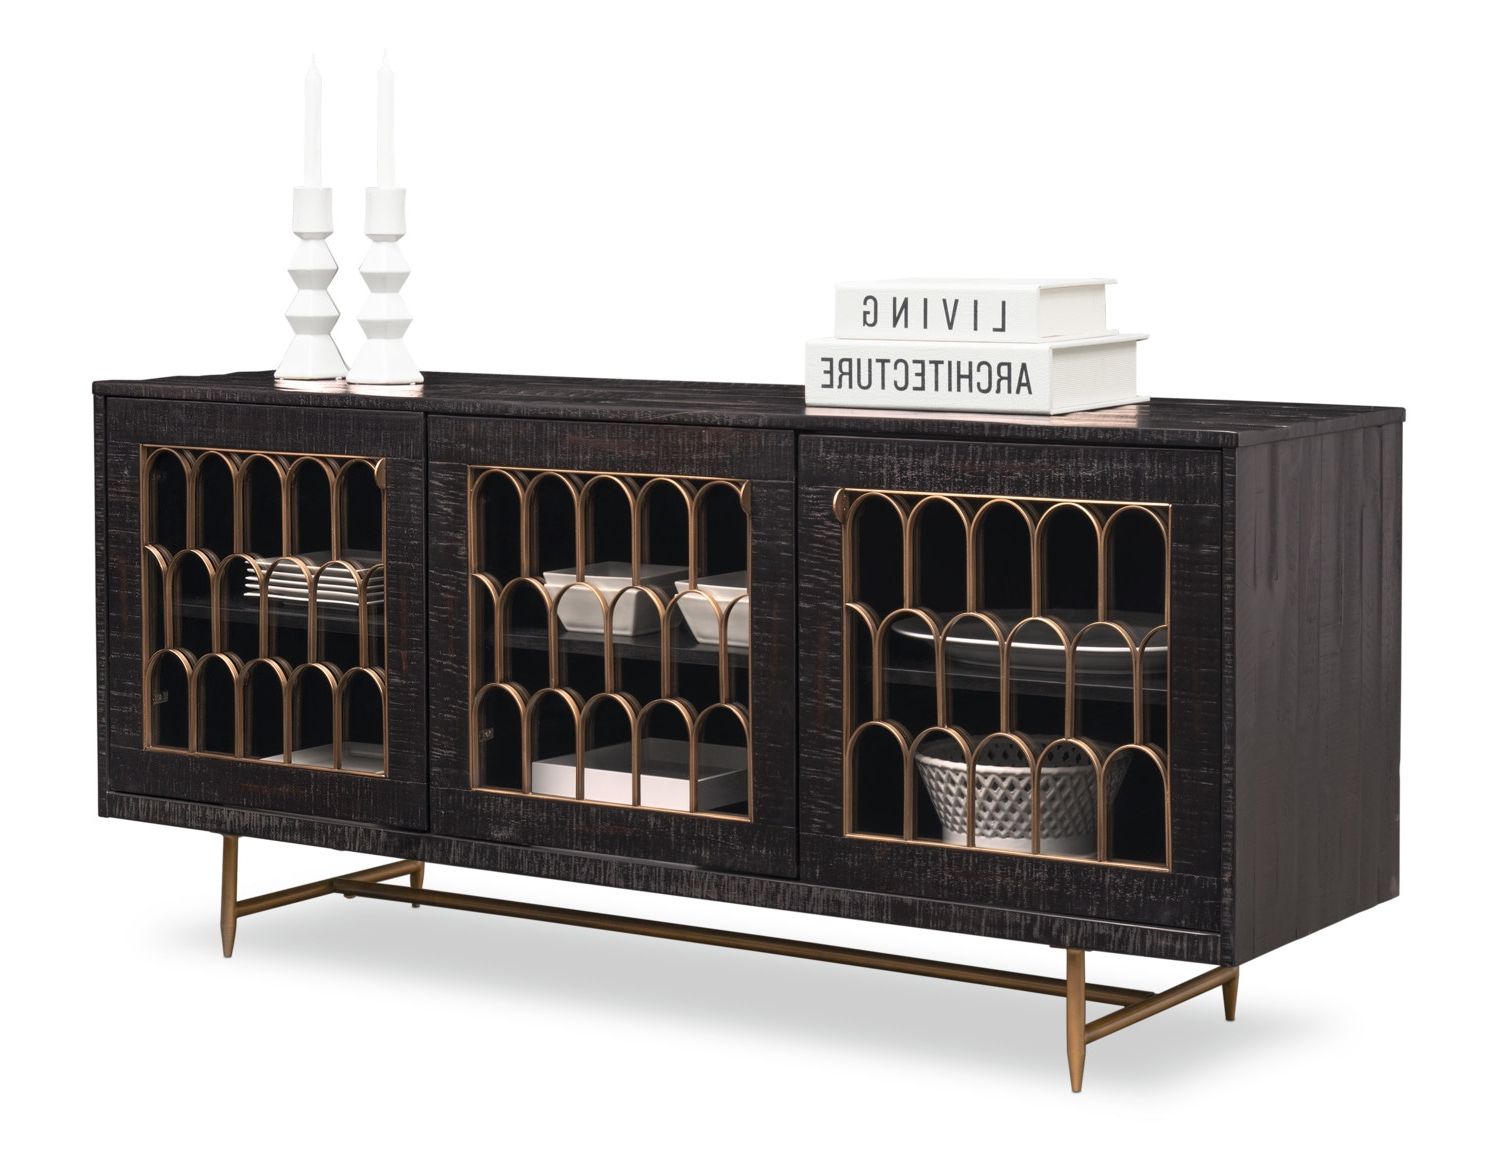 Tov Art Deco Buffet – Black In 2019 | Biltmore Entry | Art Throughout Lainey Credenzas (View 14 of 20)